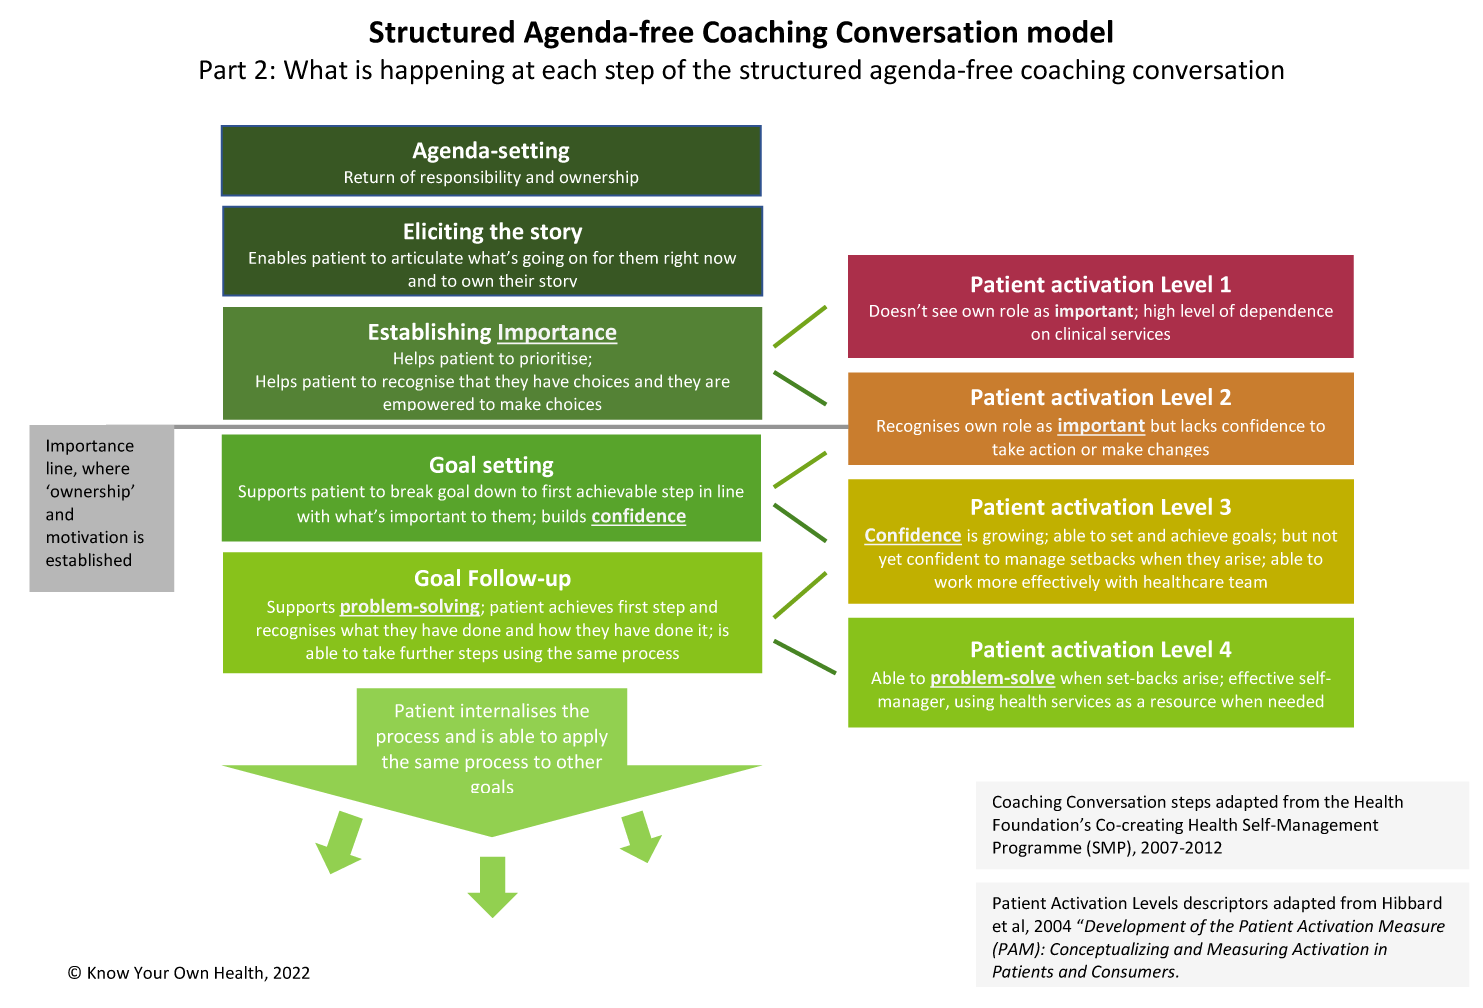 The Structured Agenda-free Coaching Conversation model: What happens at each stage, with reference to patient activation levels [Hibbert et al, 2004]